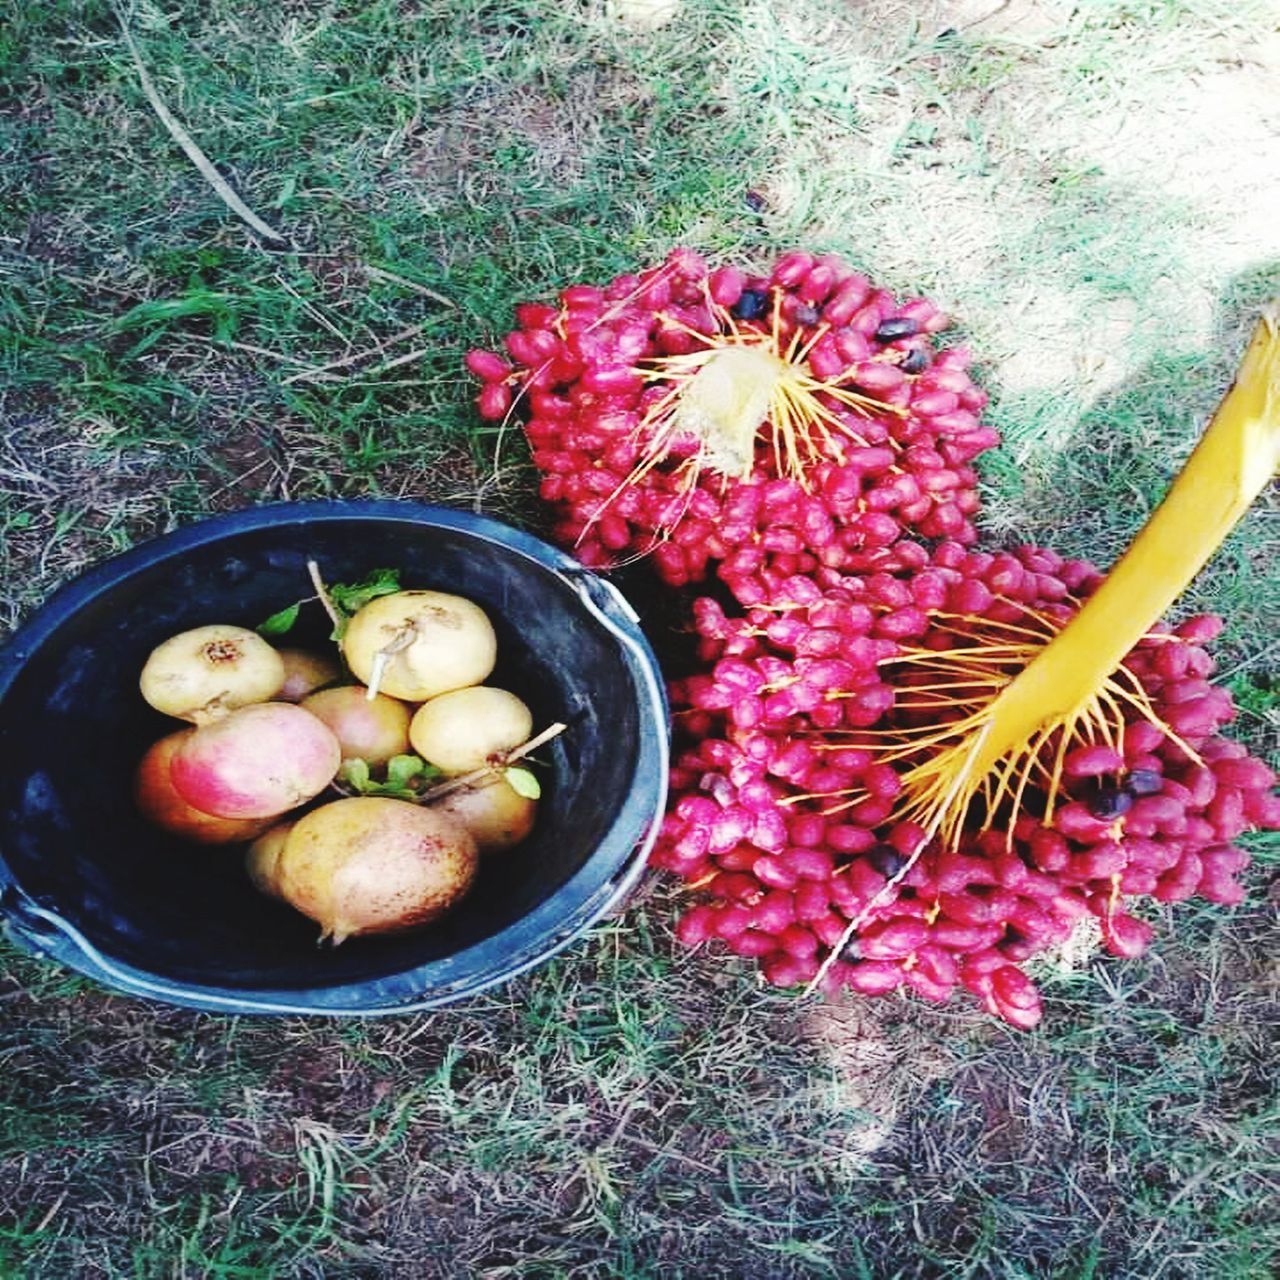 HIGH ANGLE VIEW OF FRUITS ON PLANT IN CONTAINER